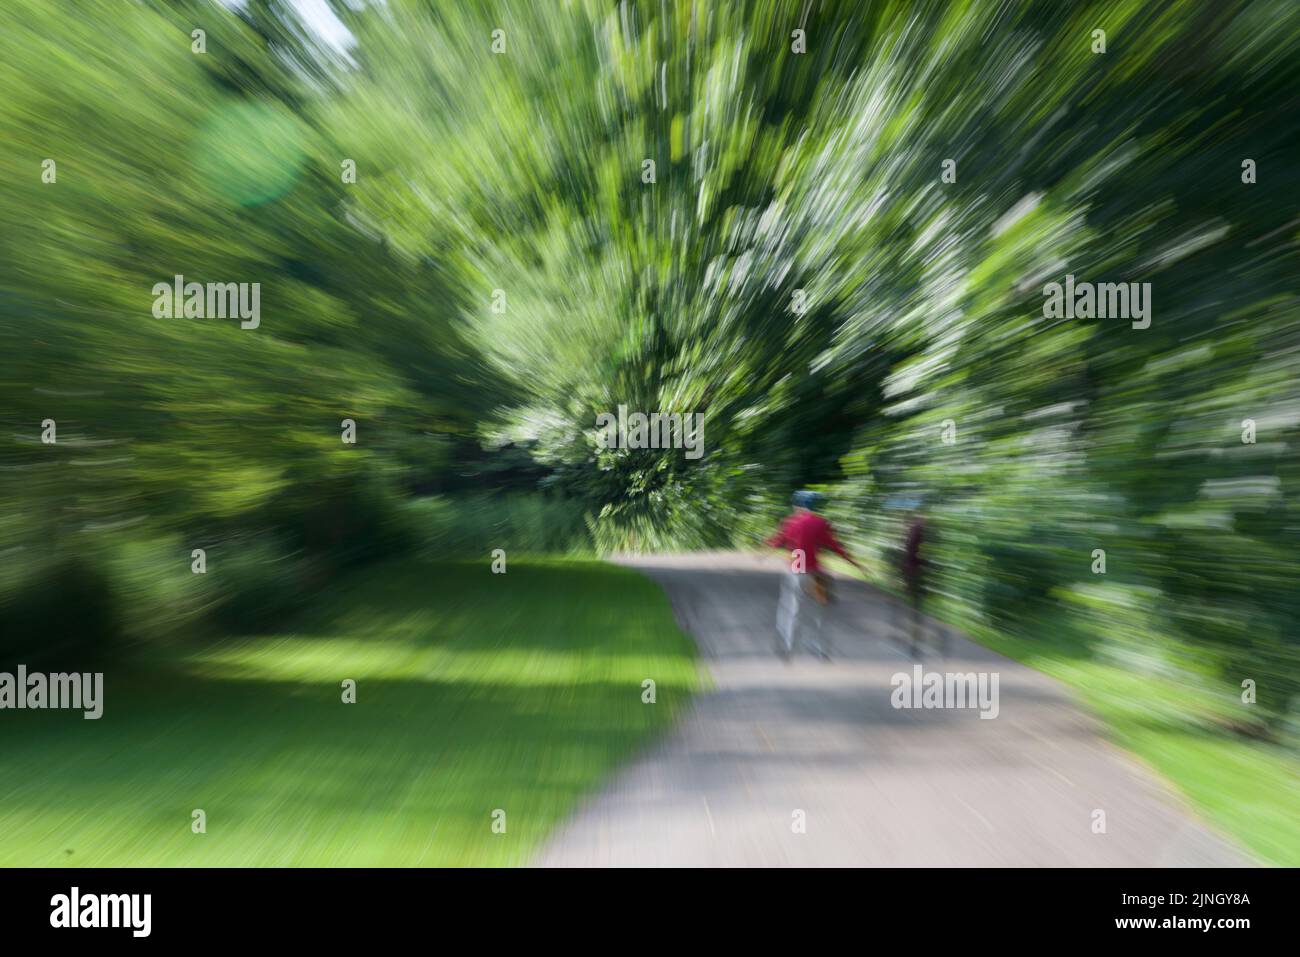 Camera zooming effect of senior adults waking in the park Stock Photo